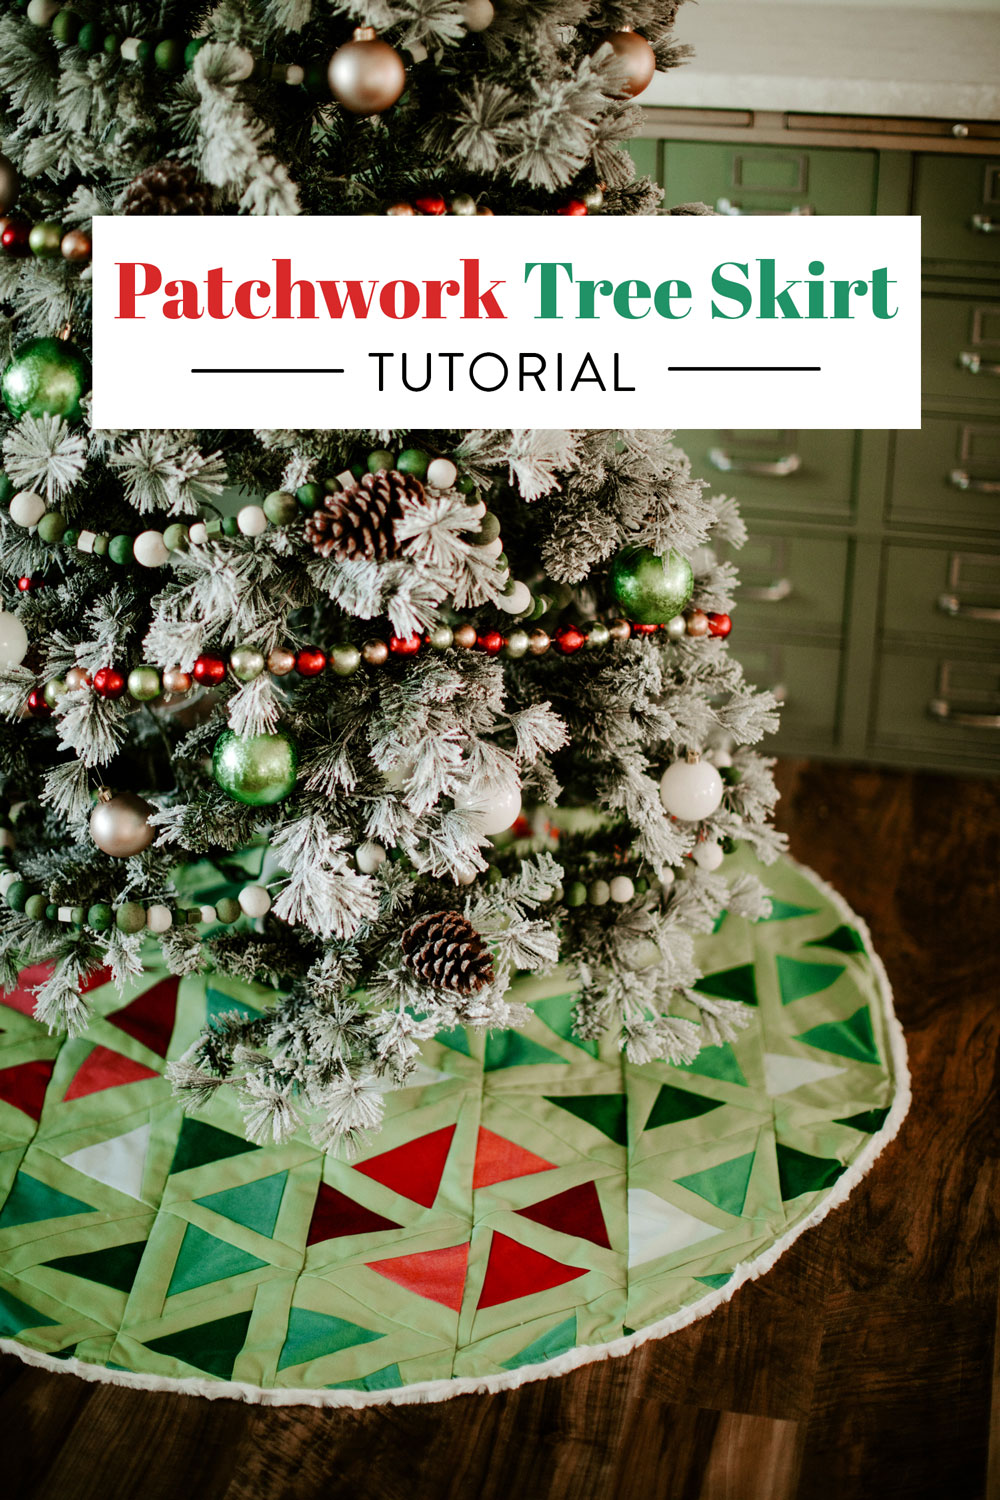 This free patchwork tree skirt tutorial uses a modern quilt pattern to create a beautiful DIY tree skirt! suzyquilts.com #treeskirt #DIYsewing